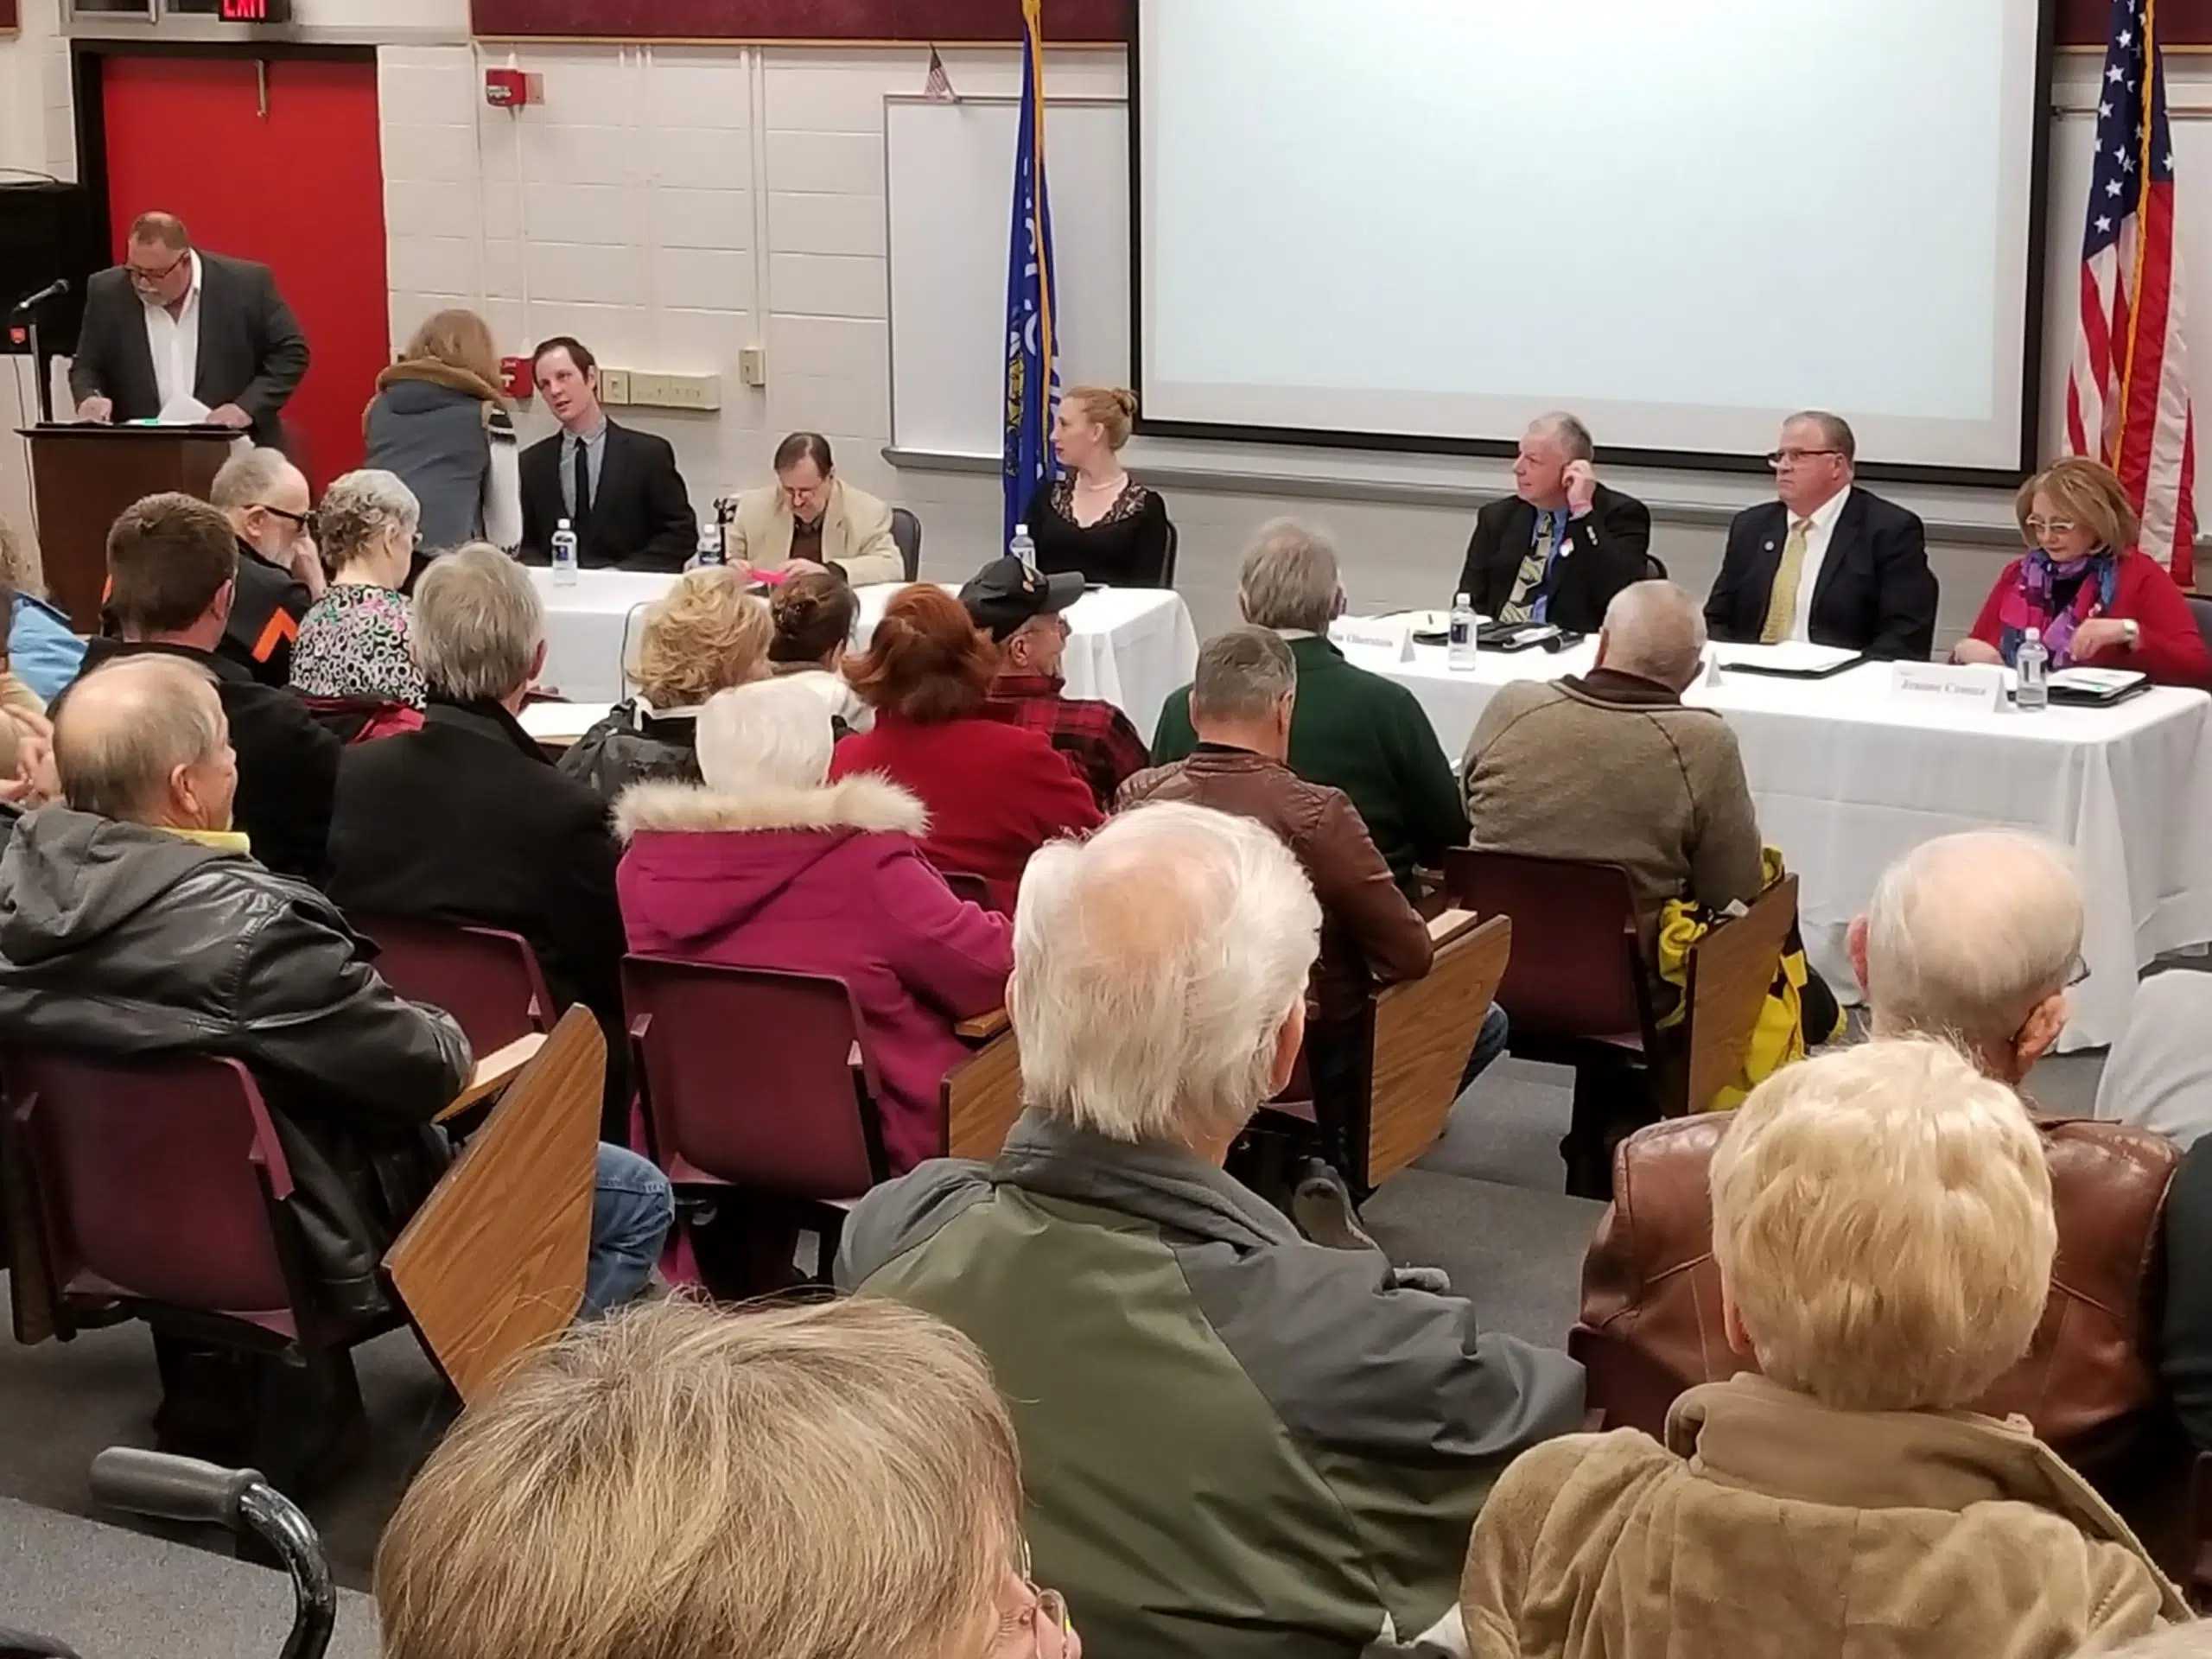 Shawano mayor candidates highlight strengths and areas for improvement